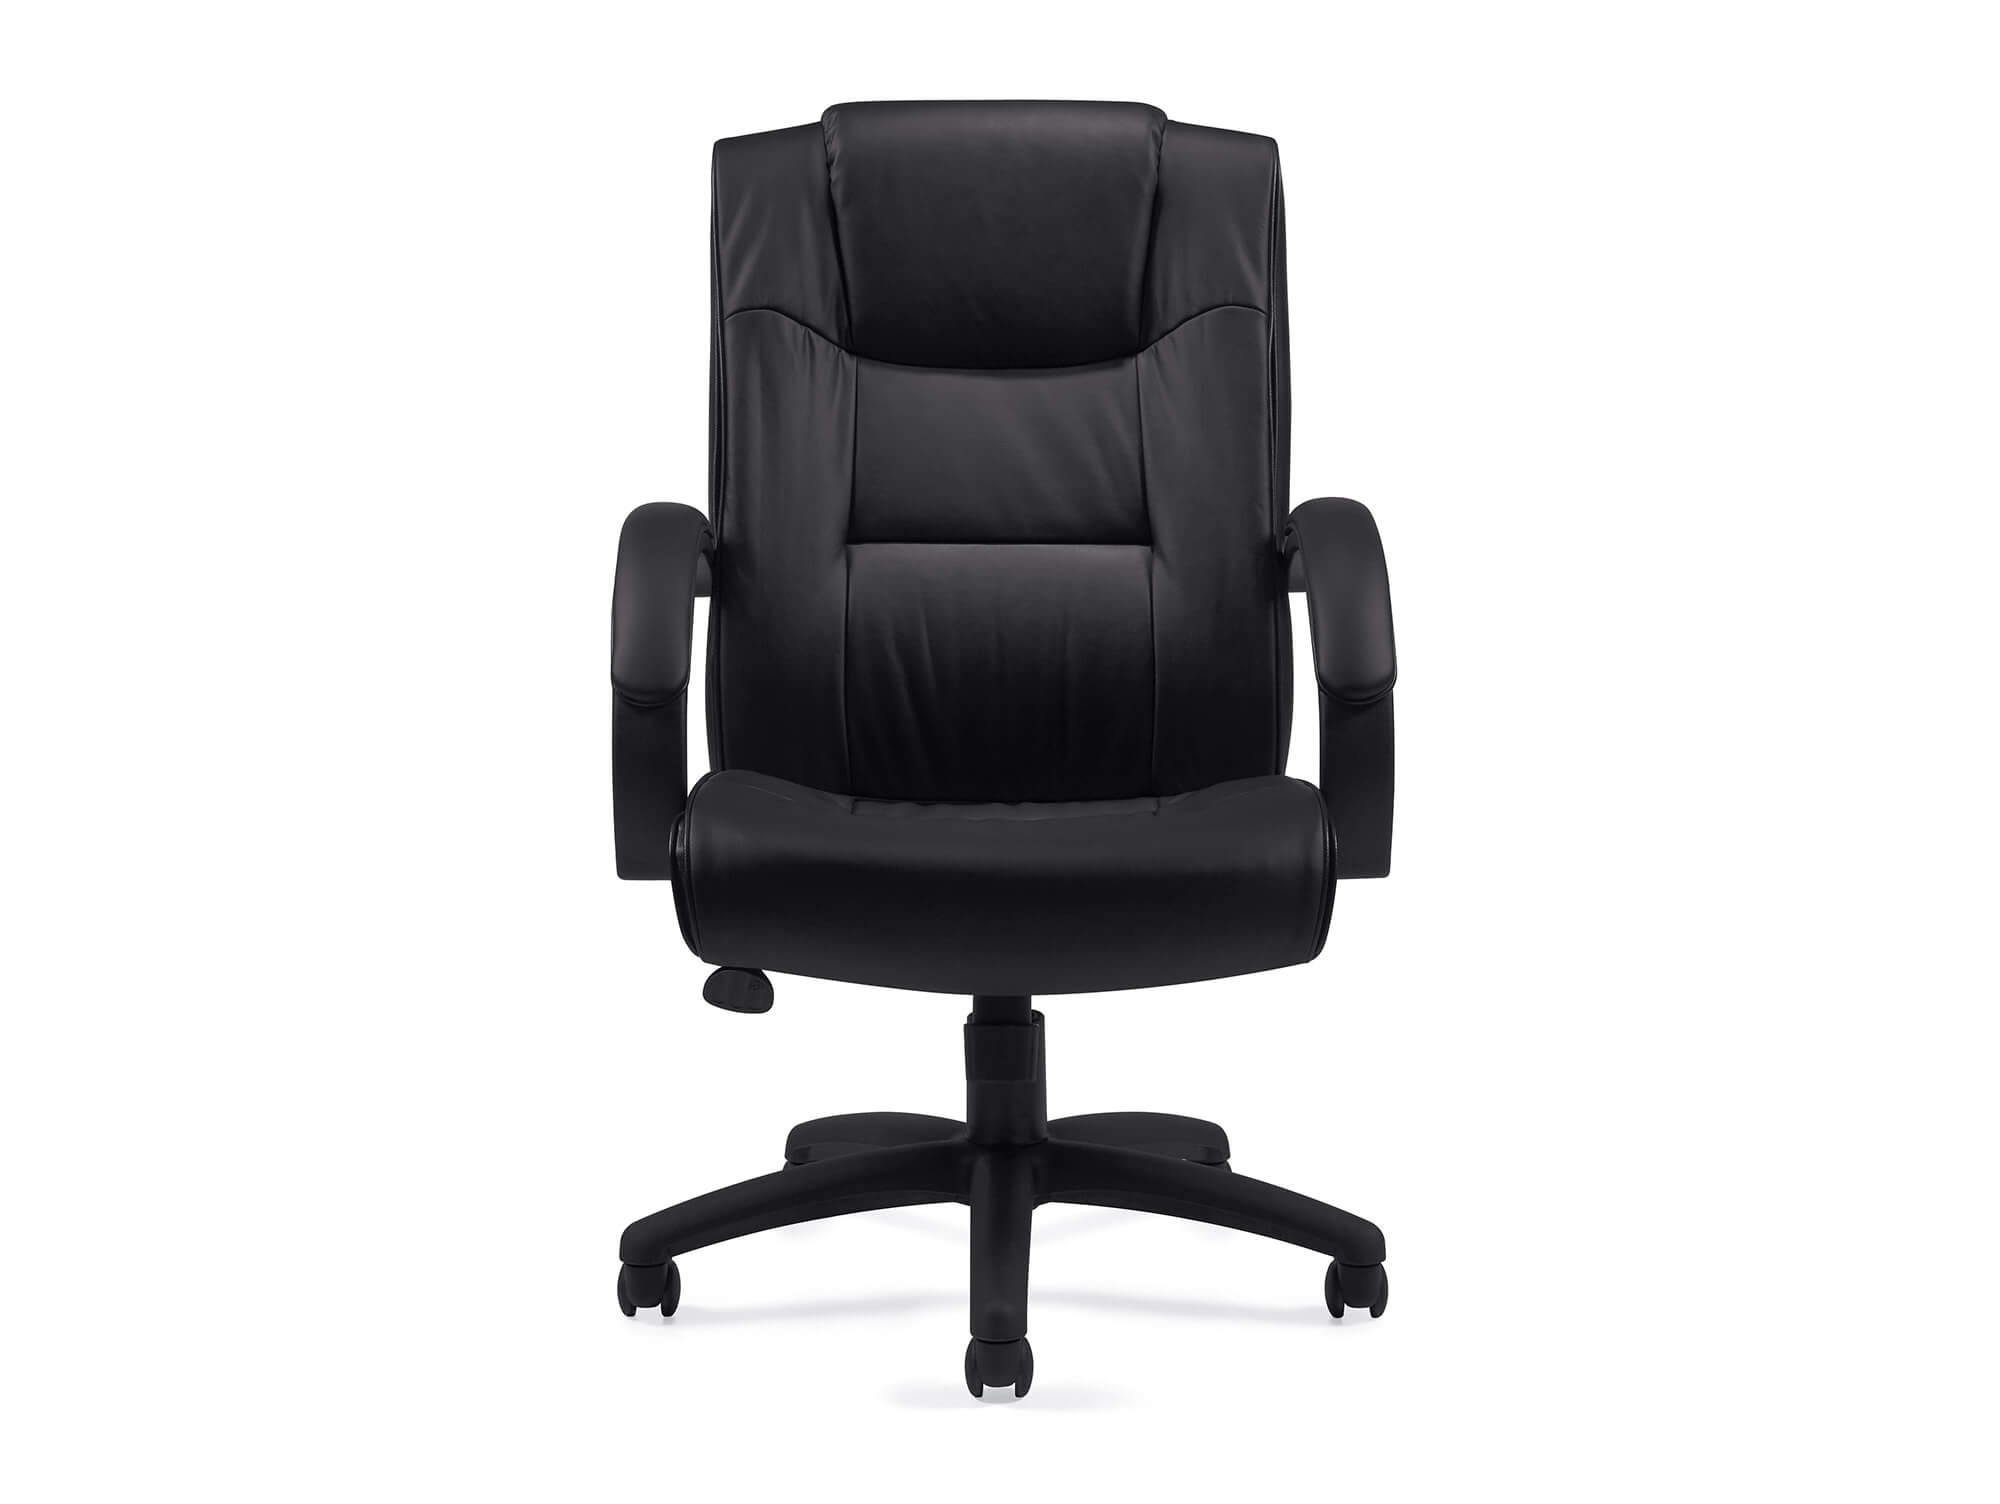 Conference style seating CUB 11618B GTO